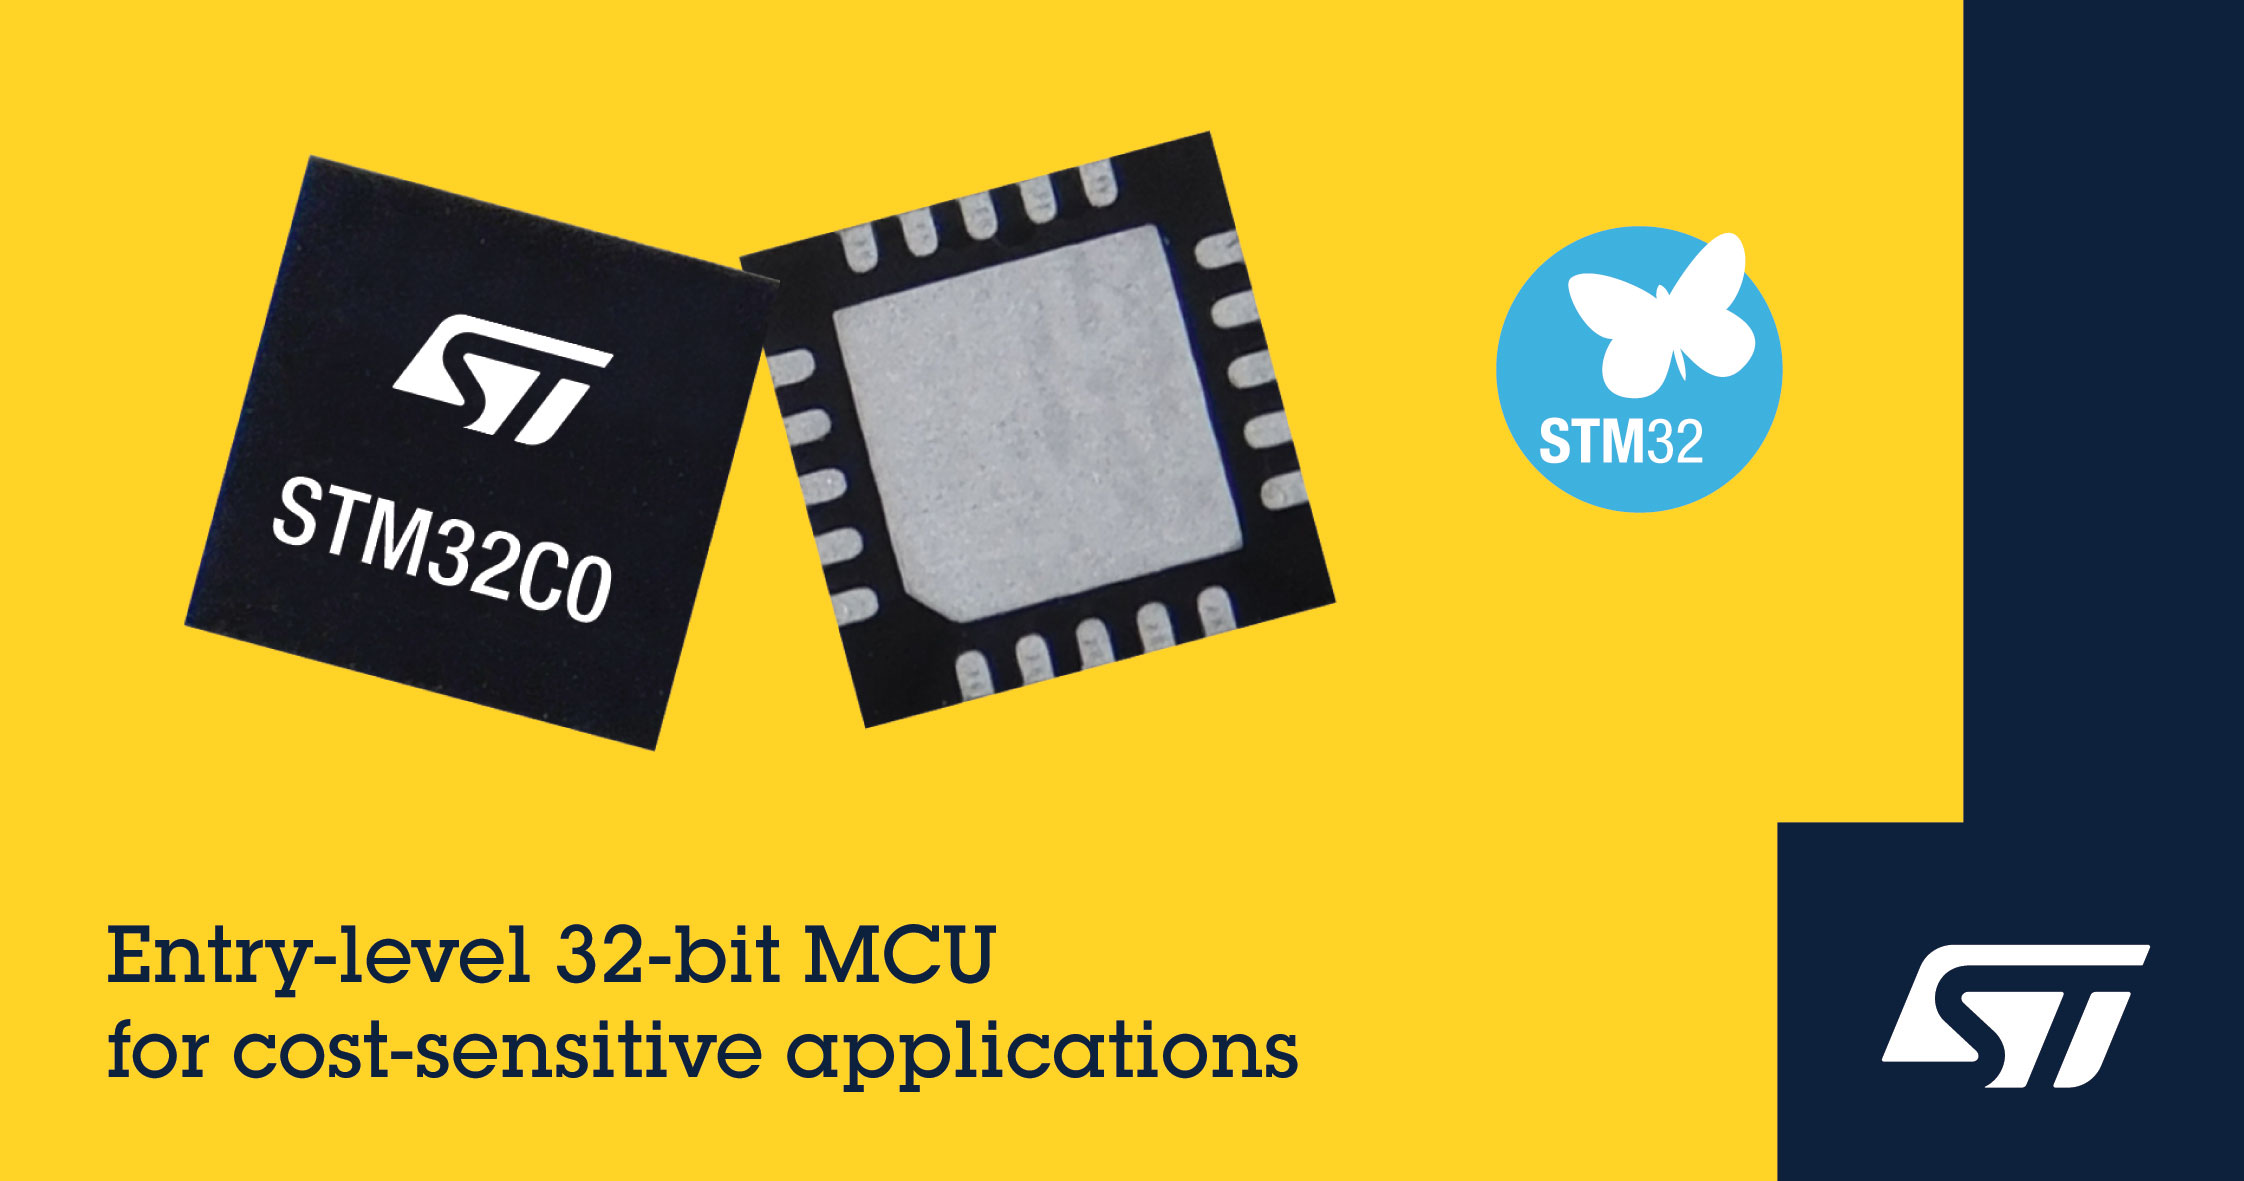 STMicroelectronics Brings 32-bit Kick to Cost-Sensitive 8-bit Applications with STM32C0 Series Microcontrollers